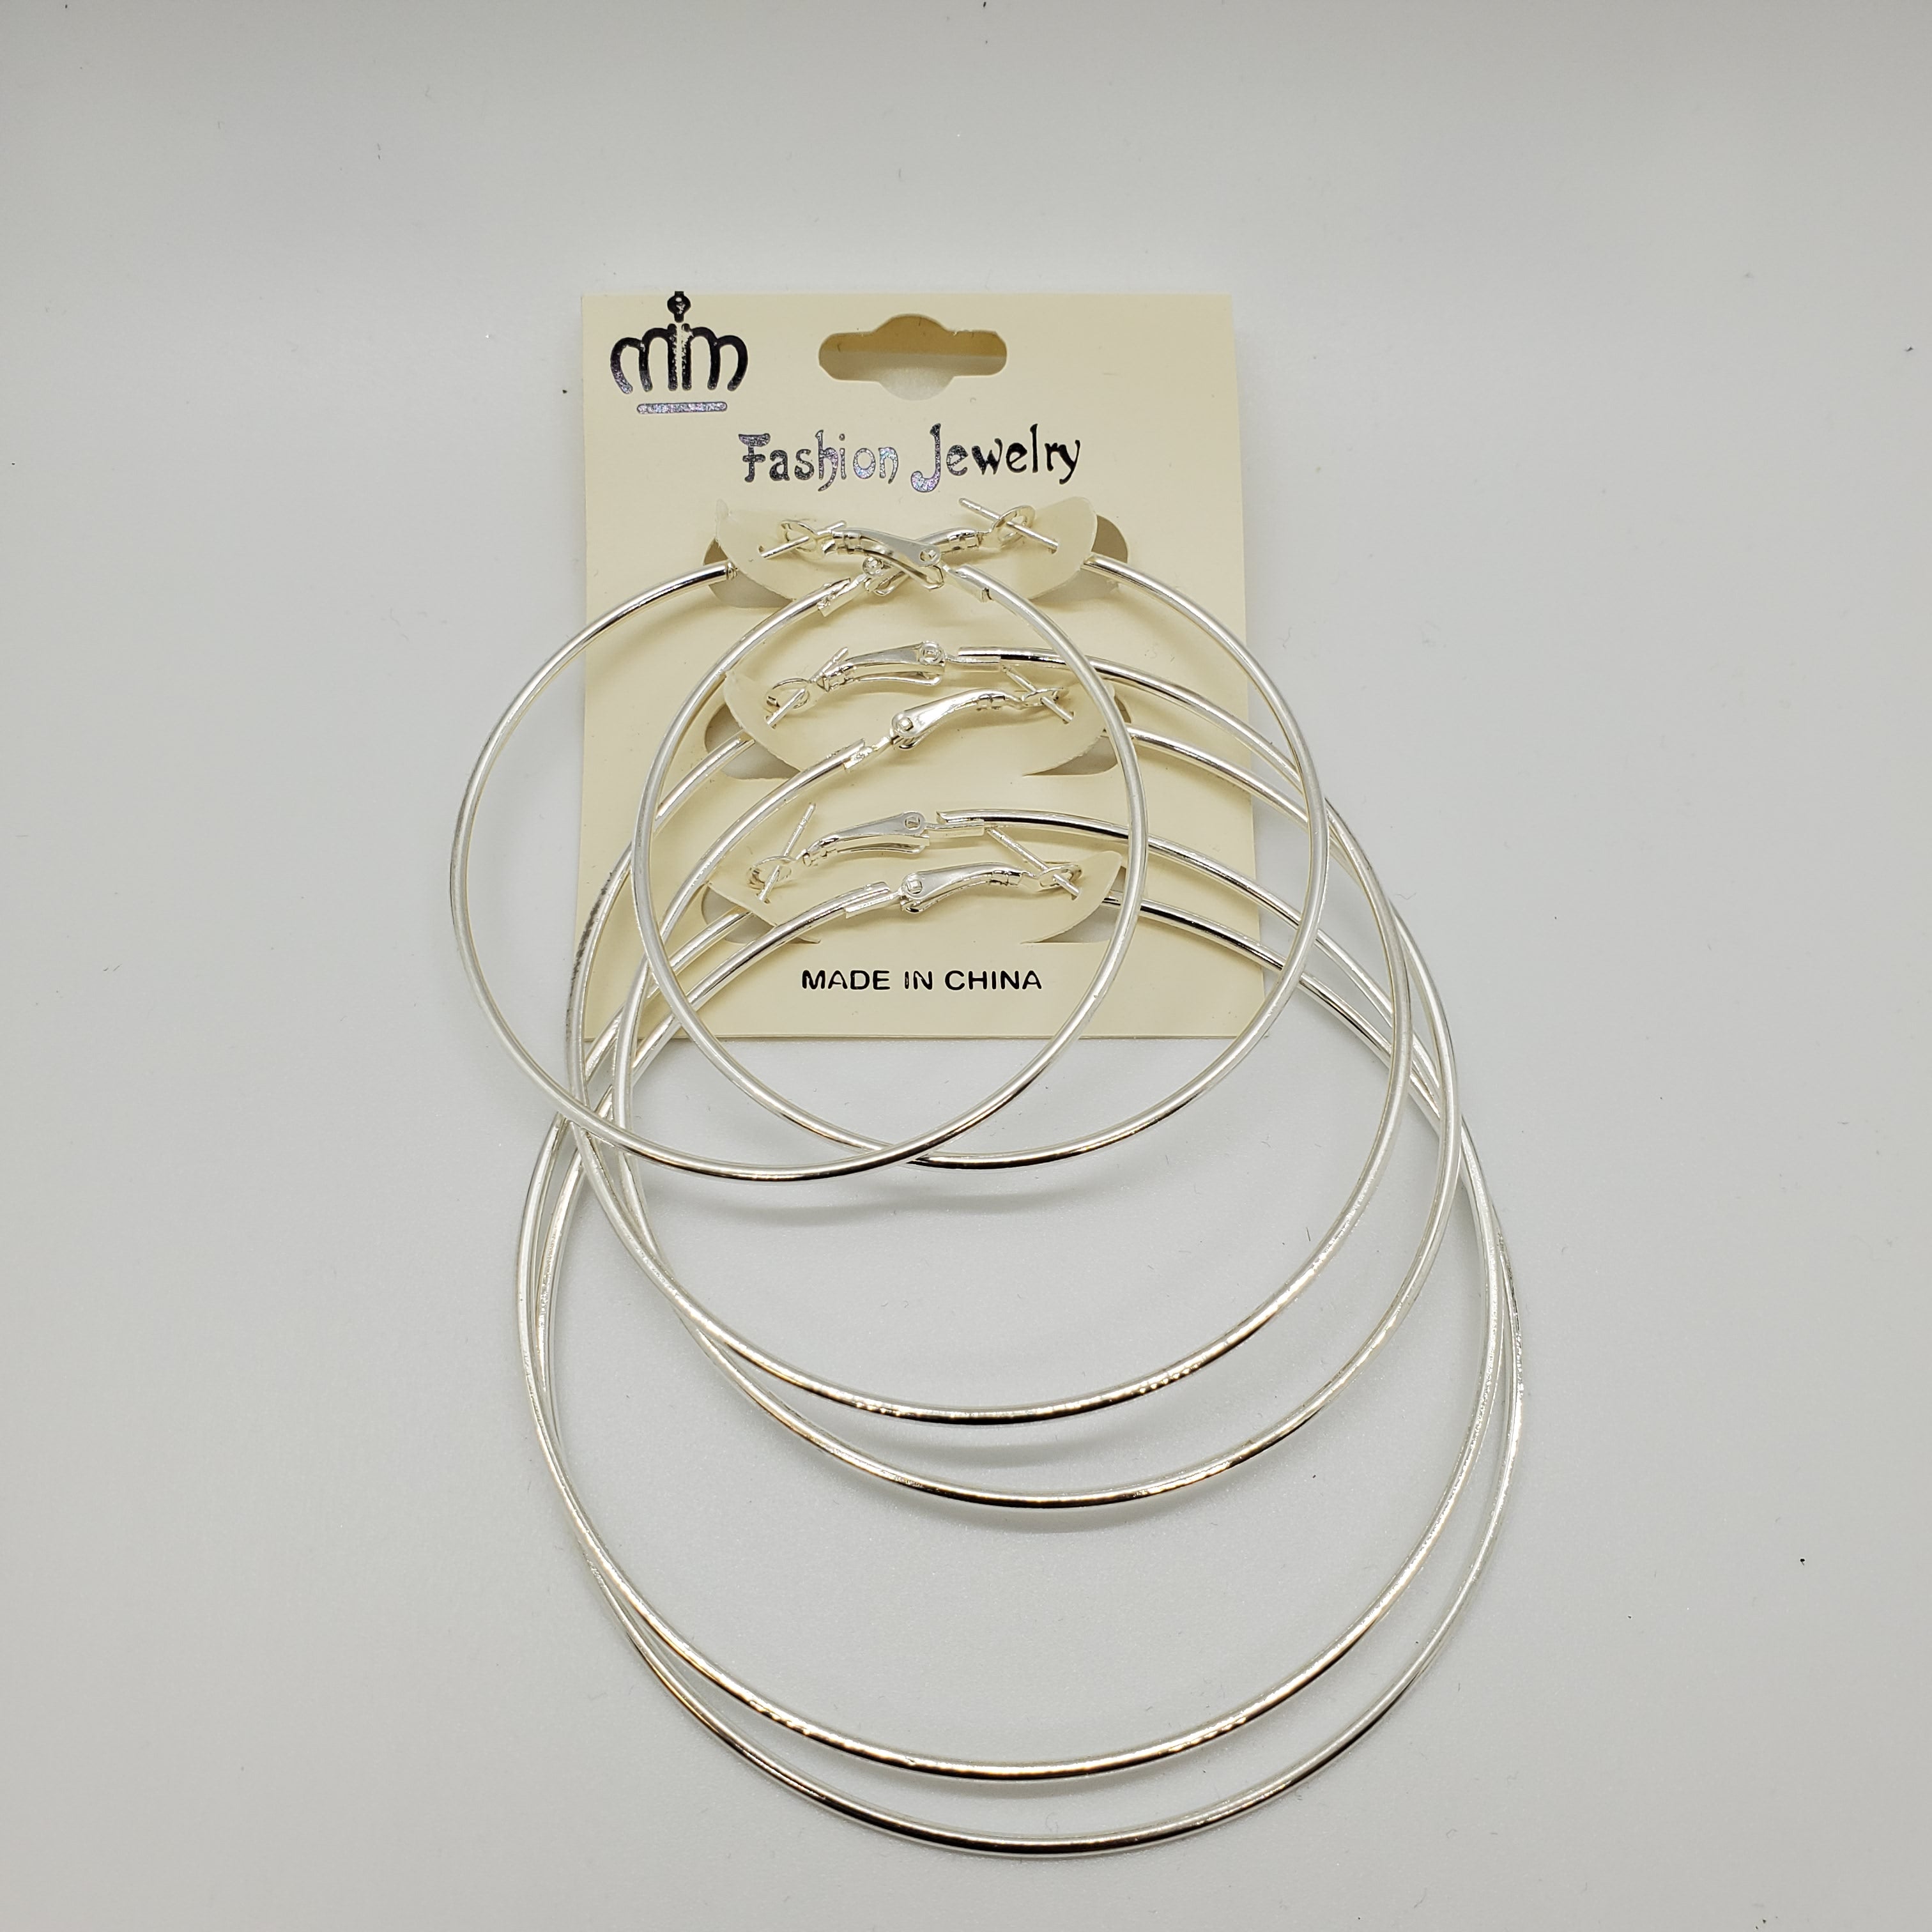 Fashion Jewelry Sliver Hoops-3pack - Beauty Bar & Supply